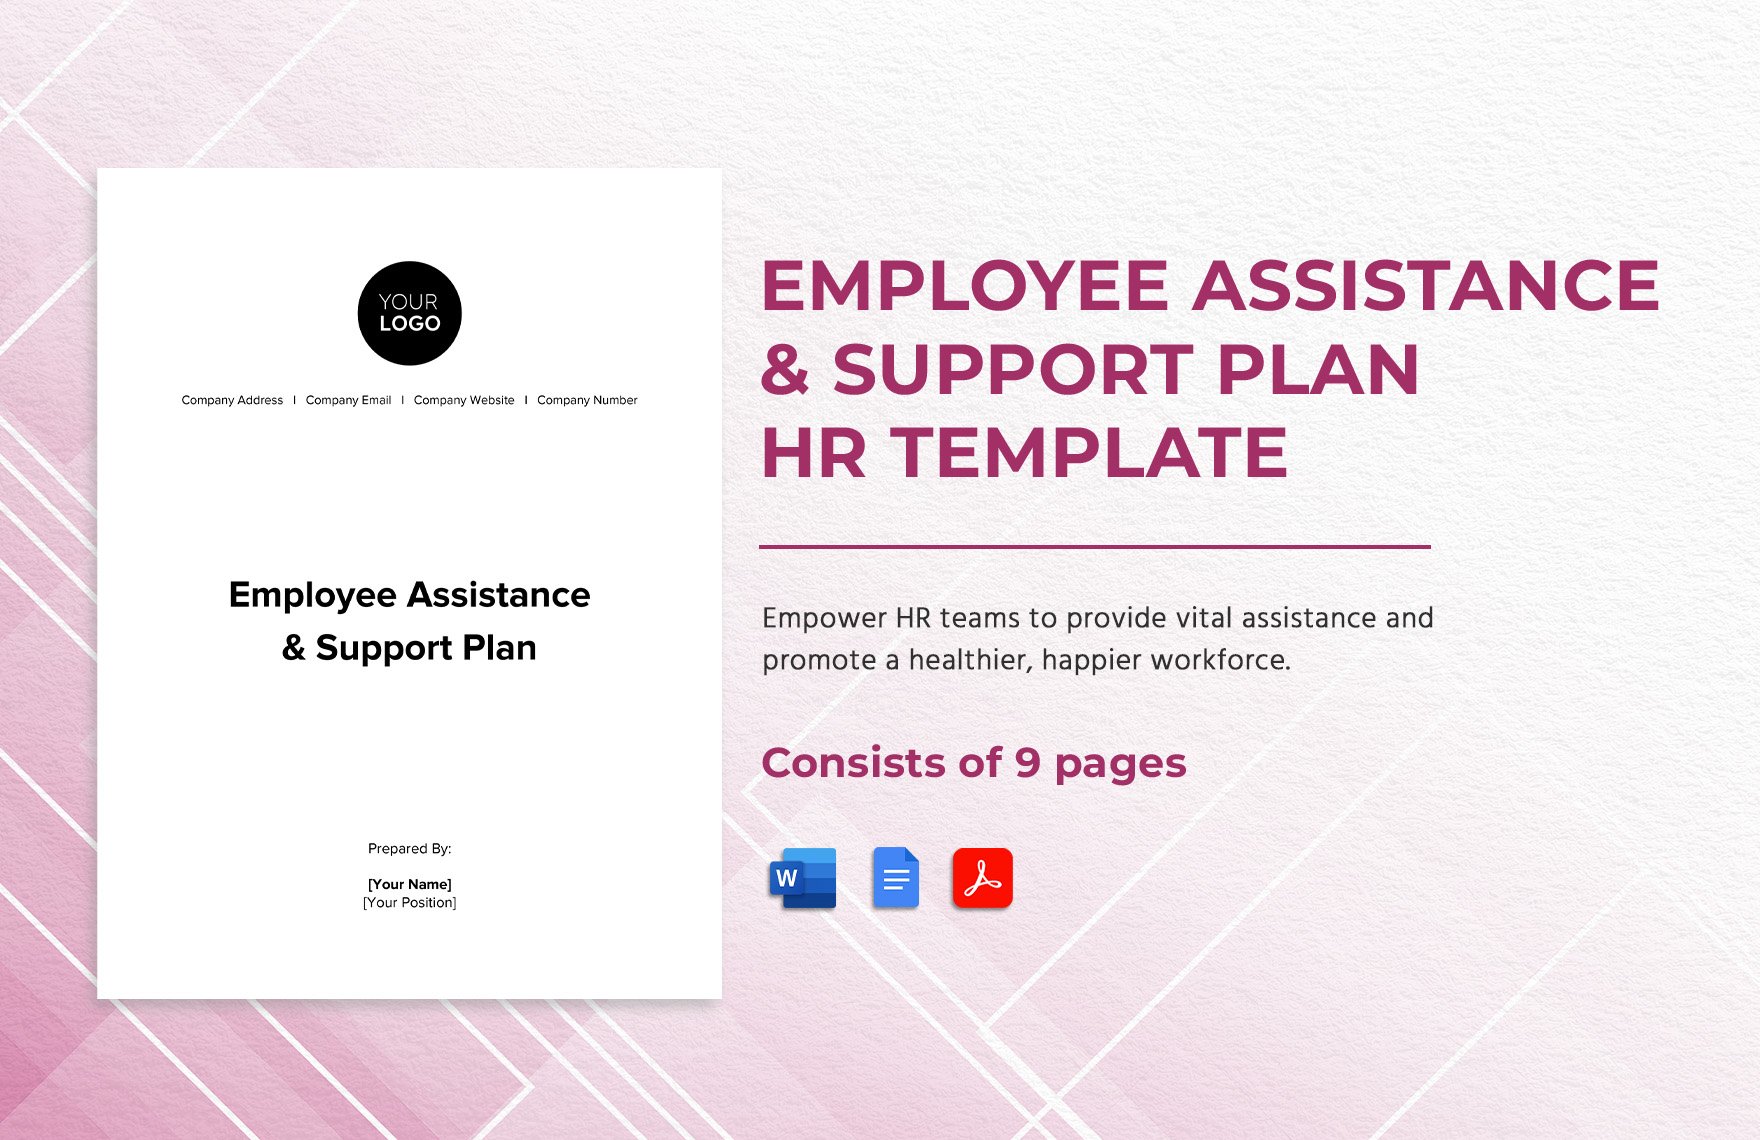 Employee Assistance & Support Plan HR Template in Word, Google Docs, PDF